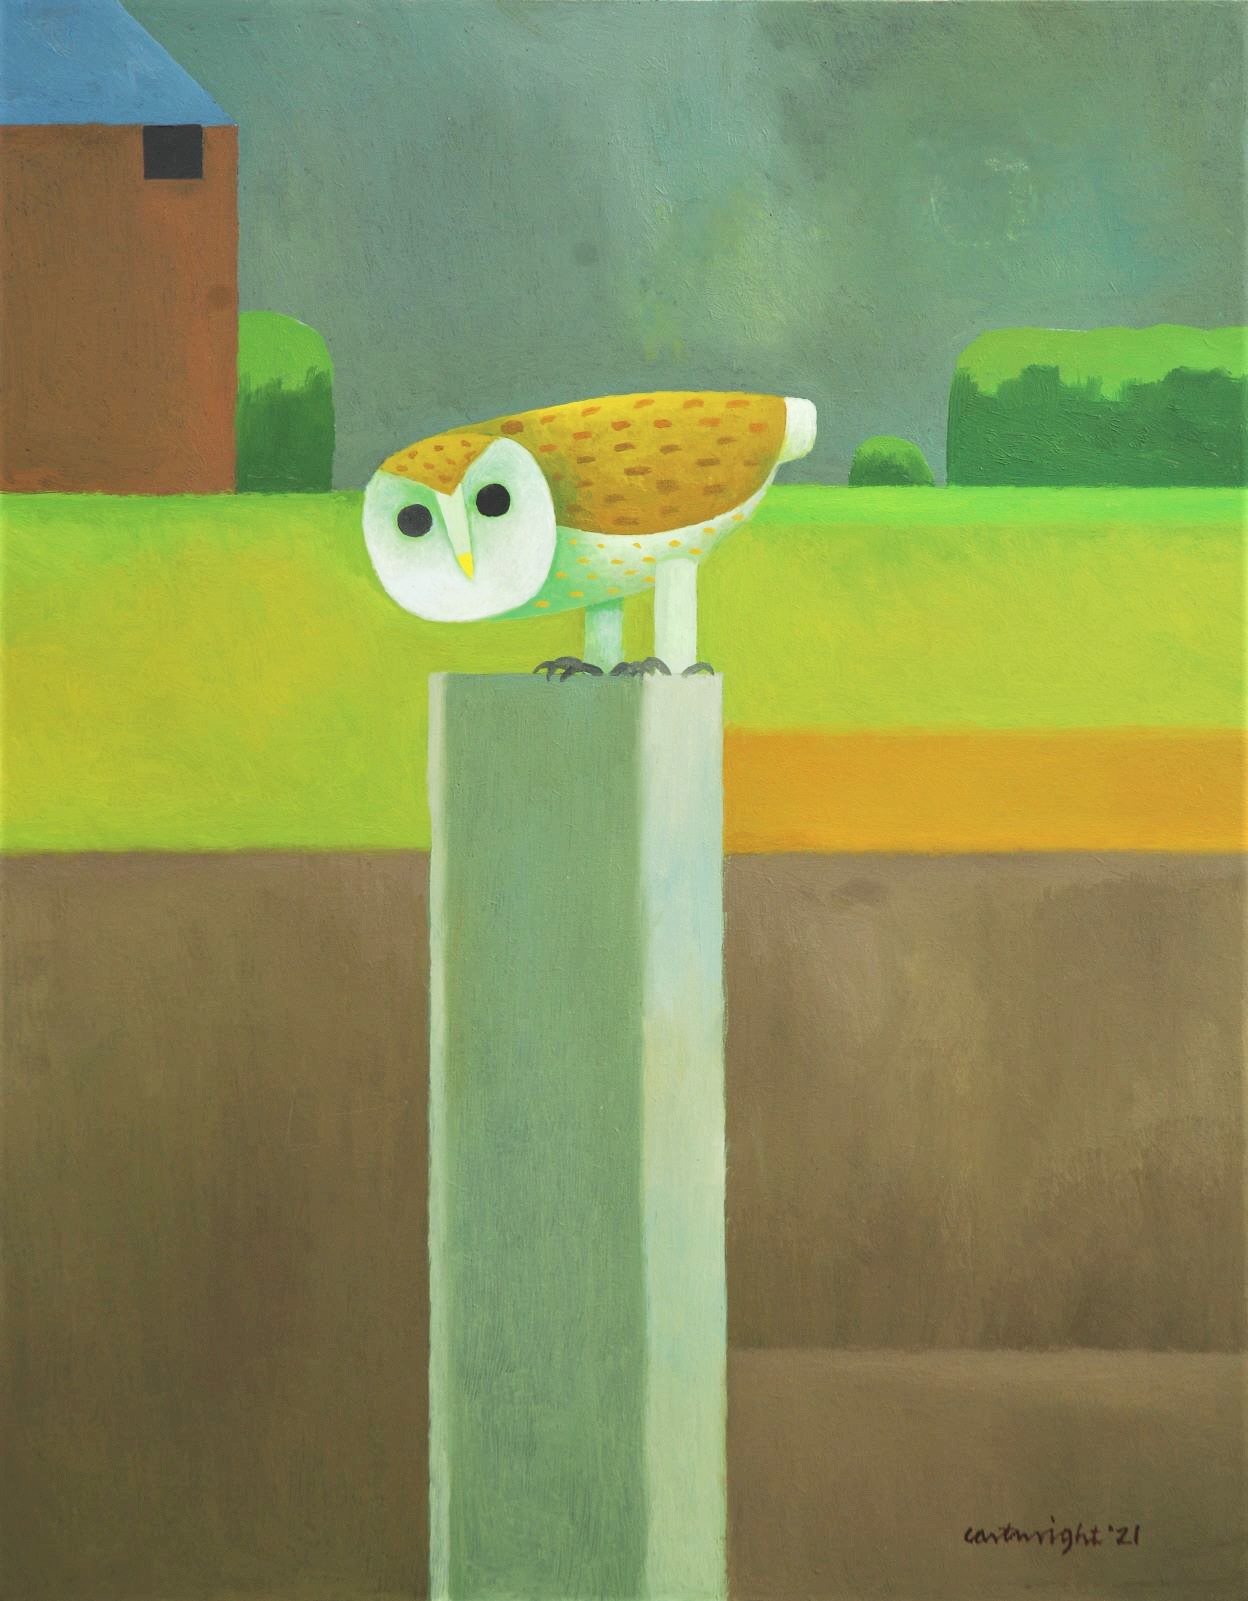 Owl XII painting by reg cartwright 2021